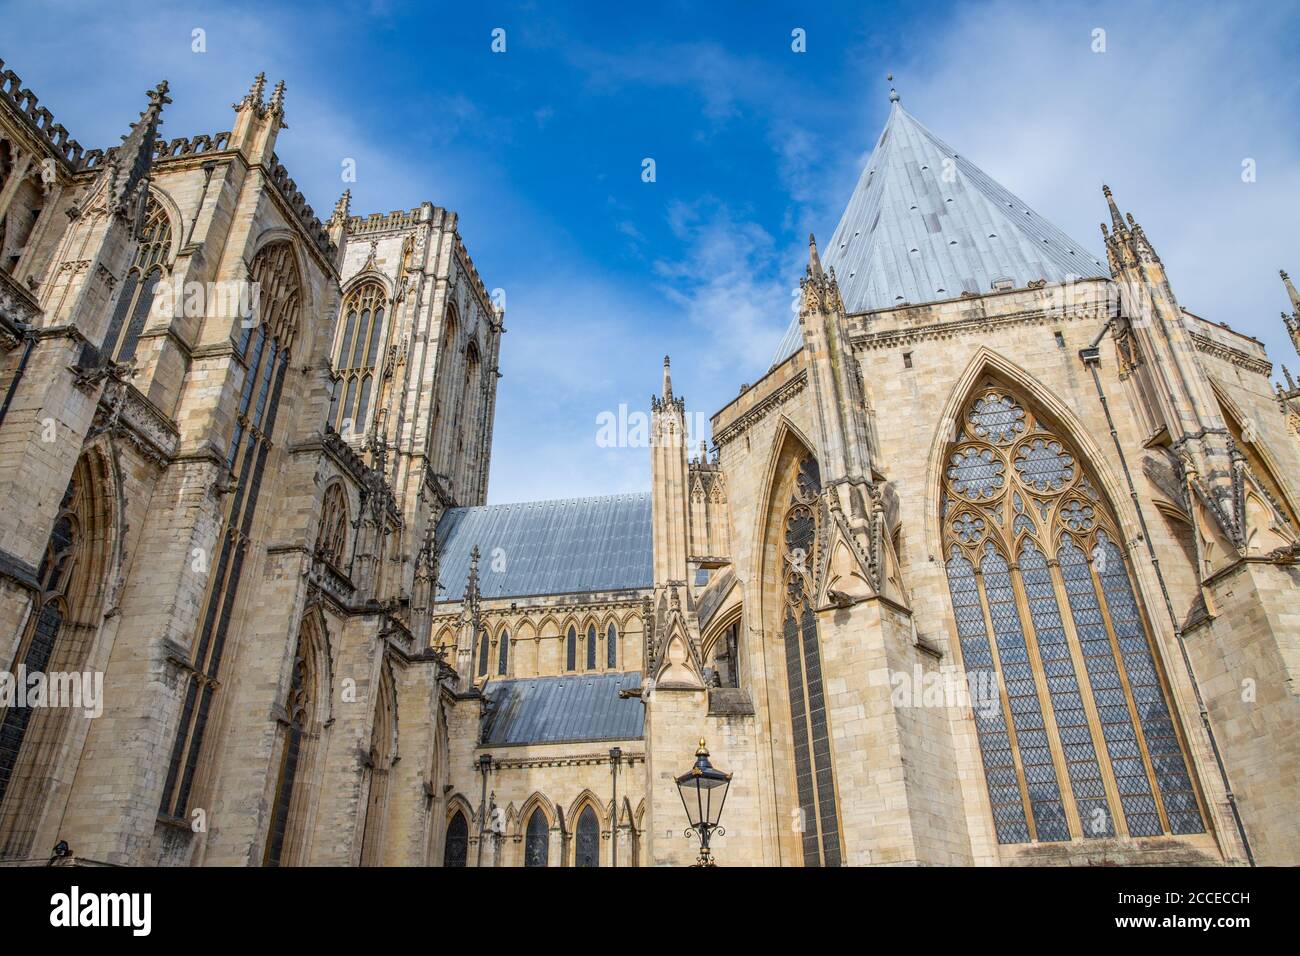 York Minster Gothic cathedral, York,Yorkshire, England Stock Photo